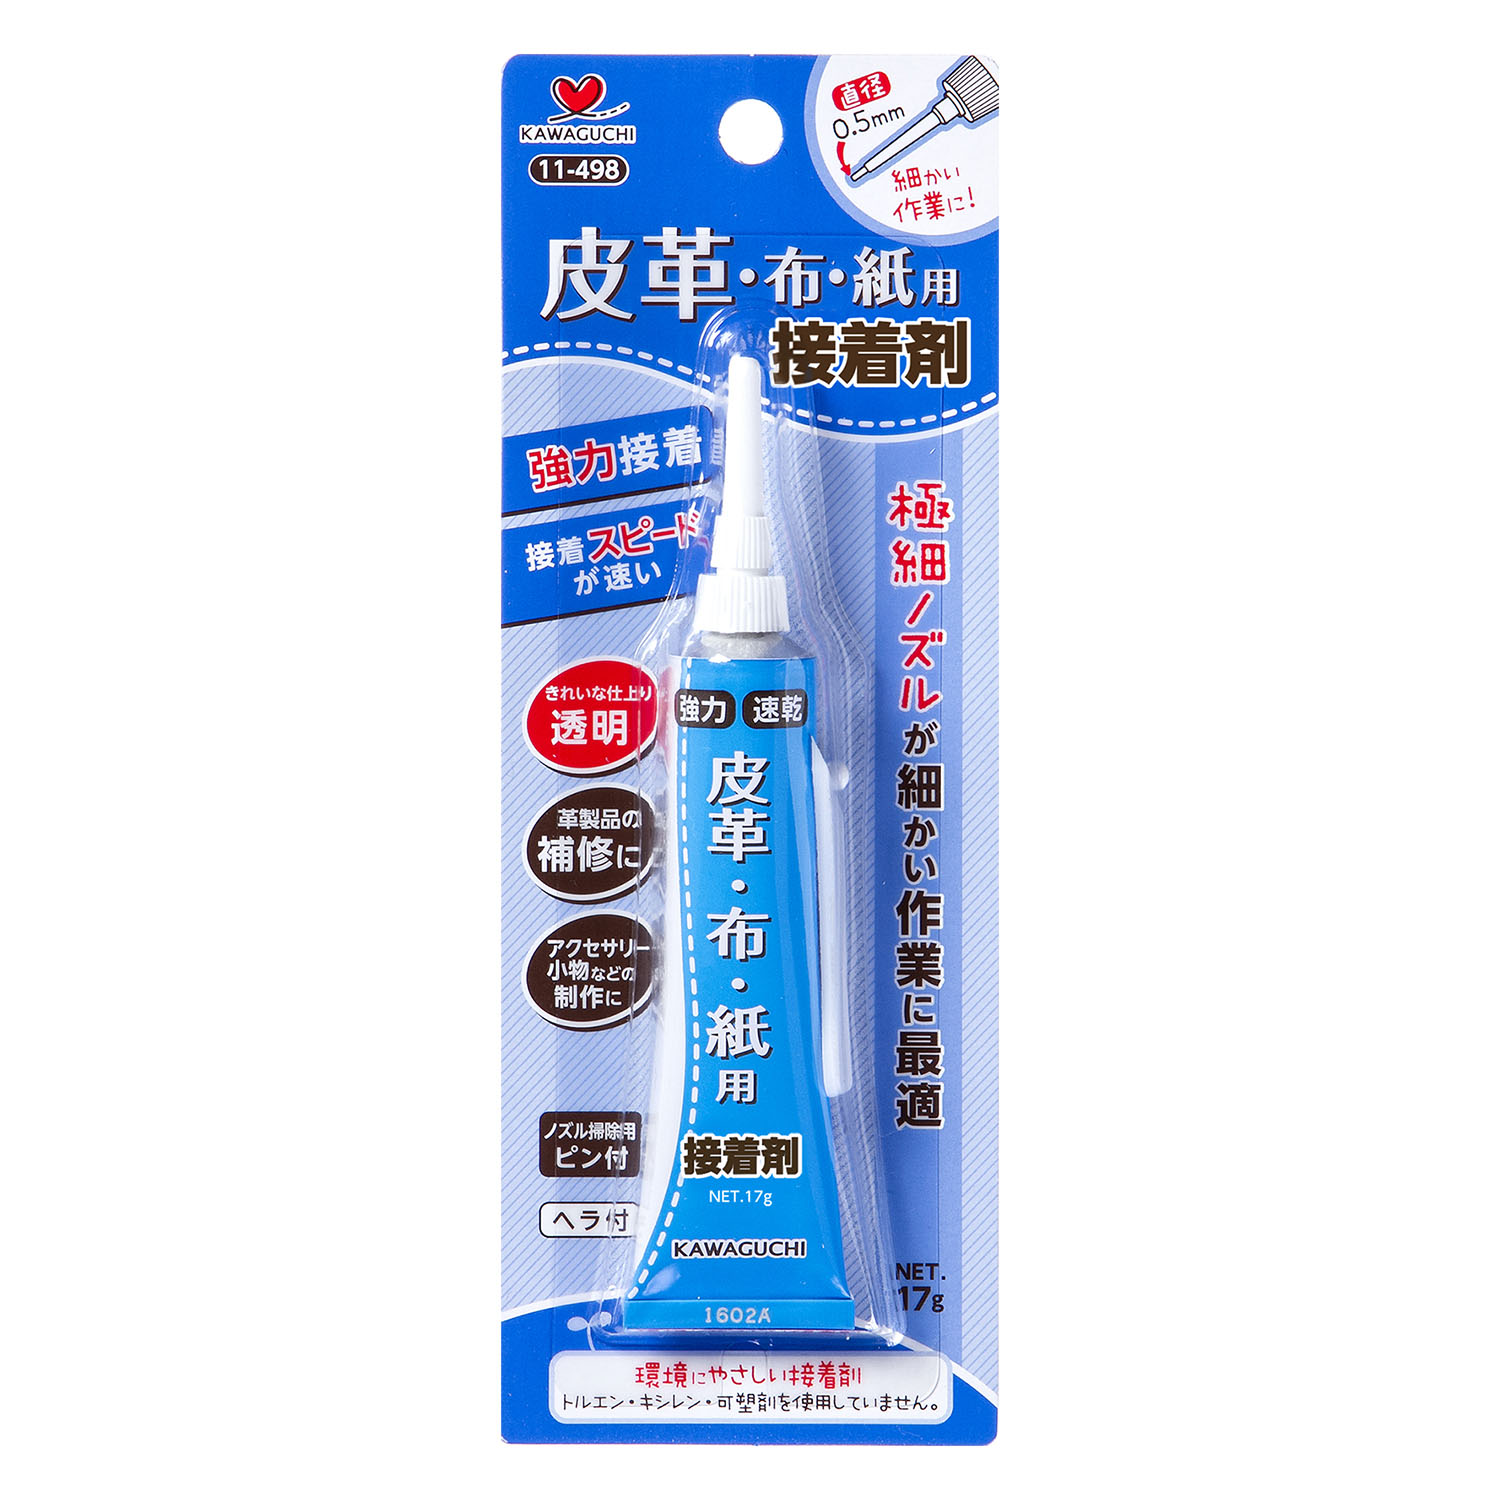 TK11498　Power Adhesive for Leather, Fabrics & Paper (pcs)